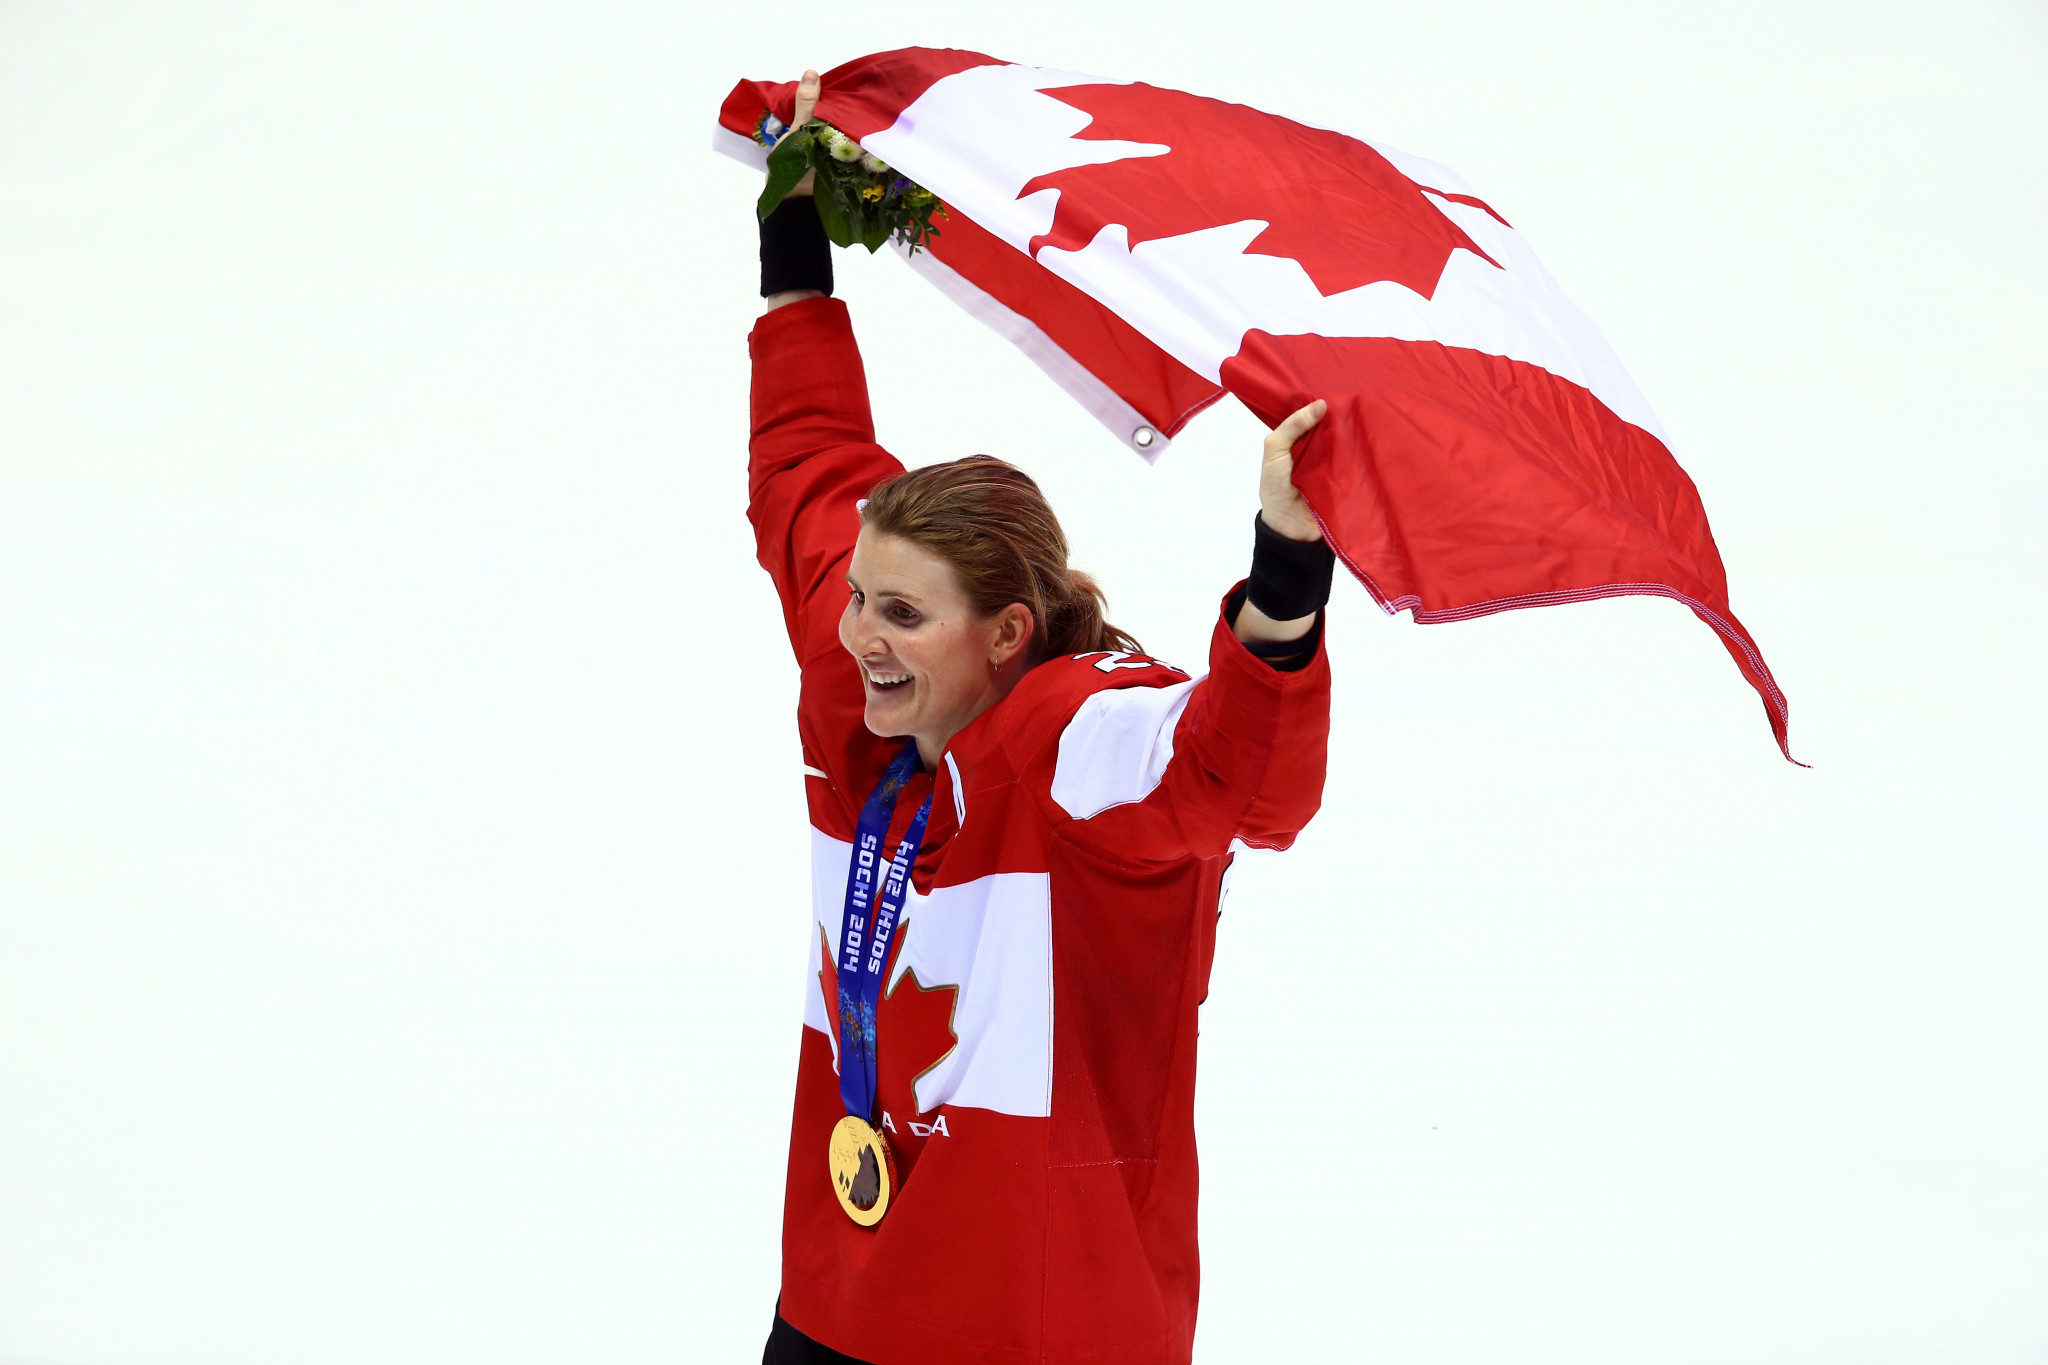 Four-time Olympic gold medallist Hayley Wickenheiser has served on the International Olympic Committee Athletes' Commission since 2014 ©Getty Images